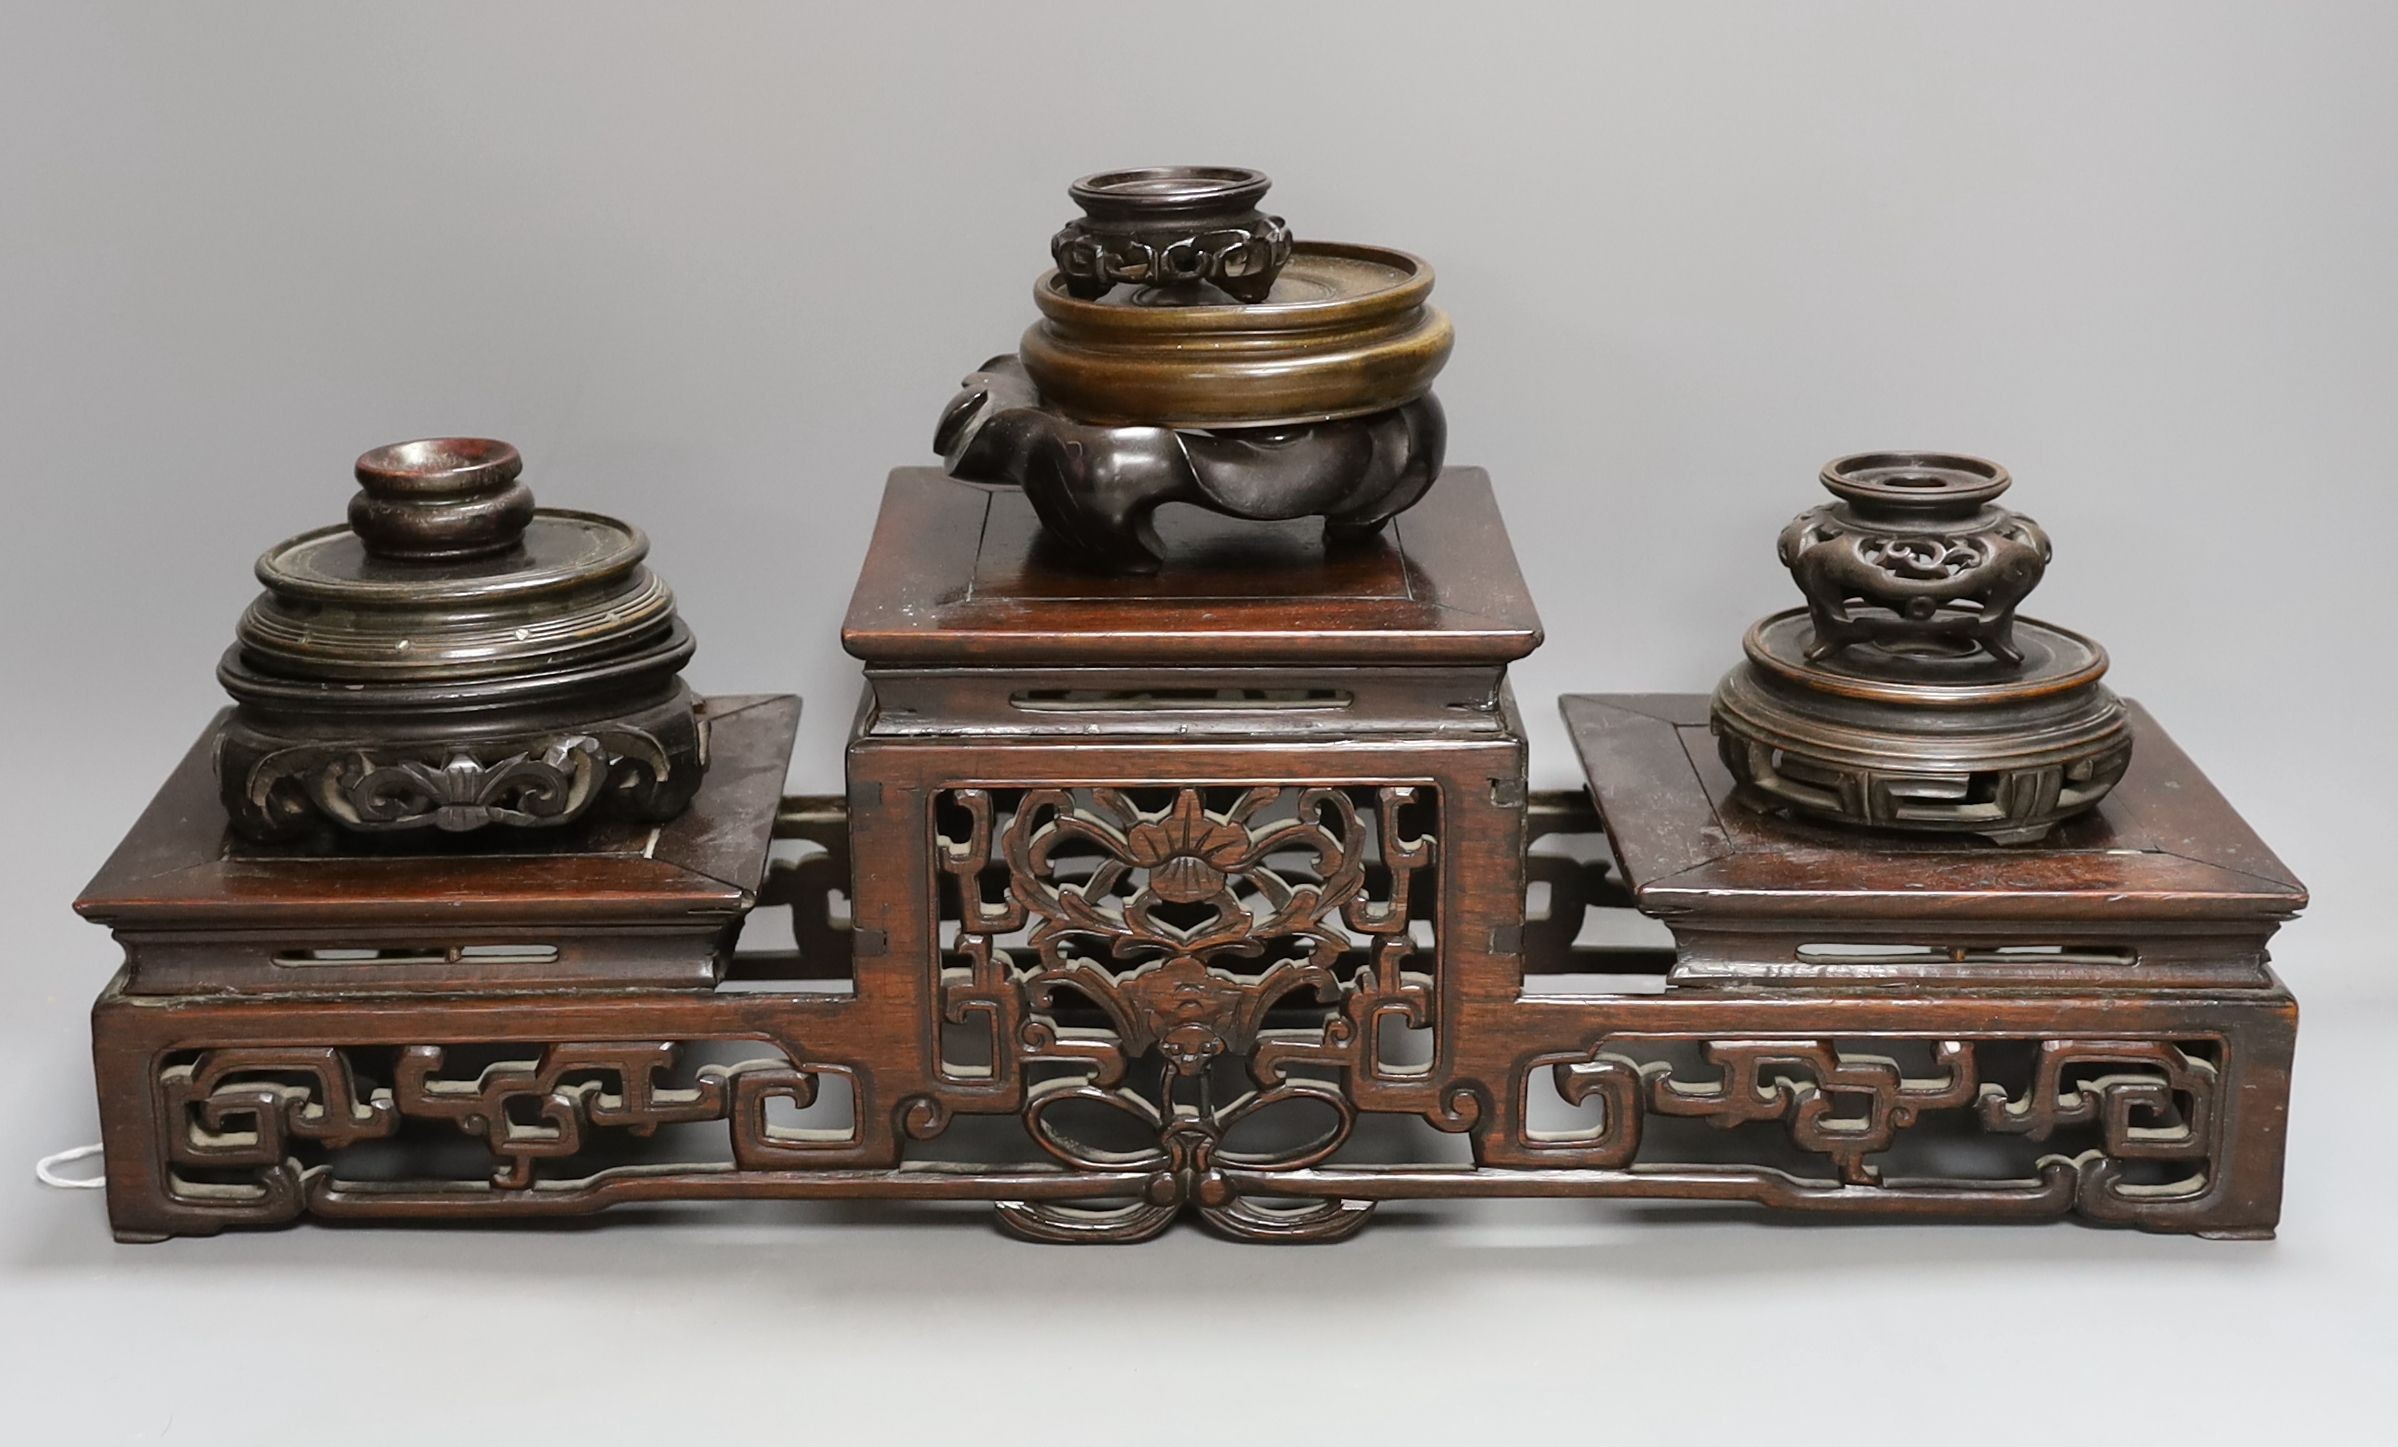 A Chinese carved hardwood 3 tier stand, late Qing, together with other similar stands. Largest 49cm